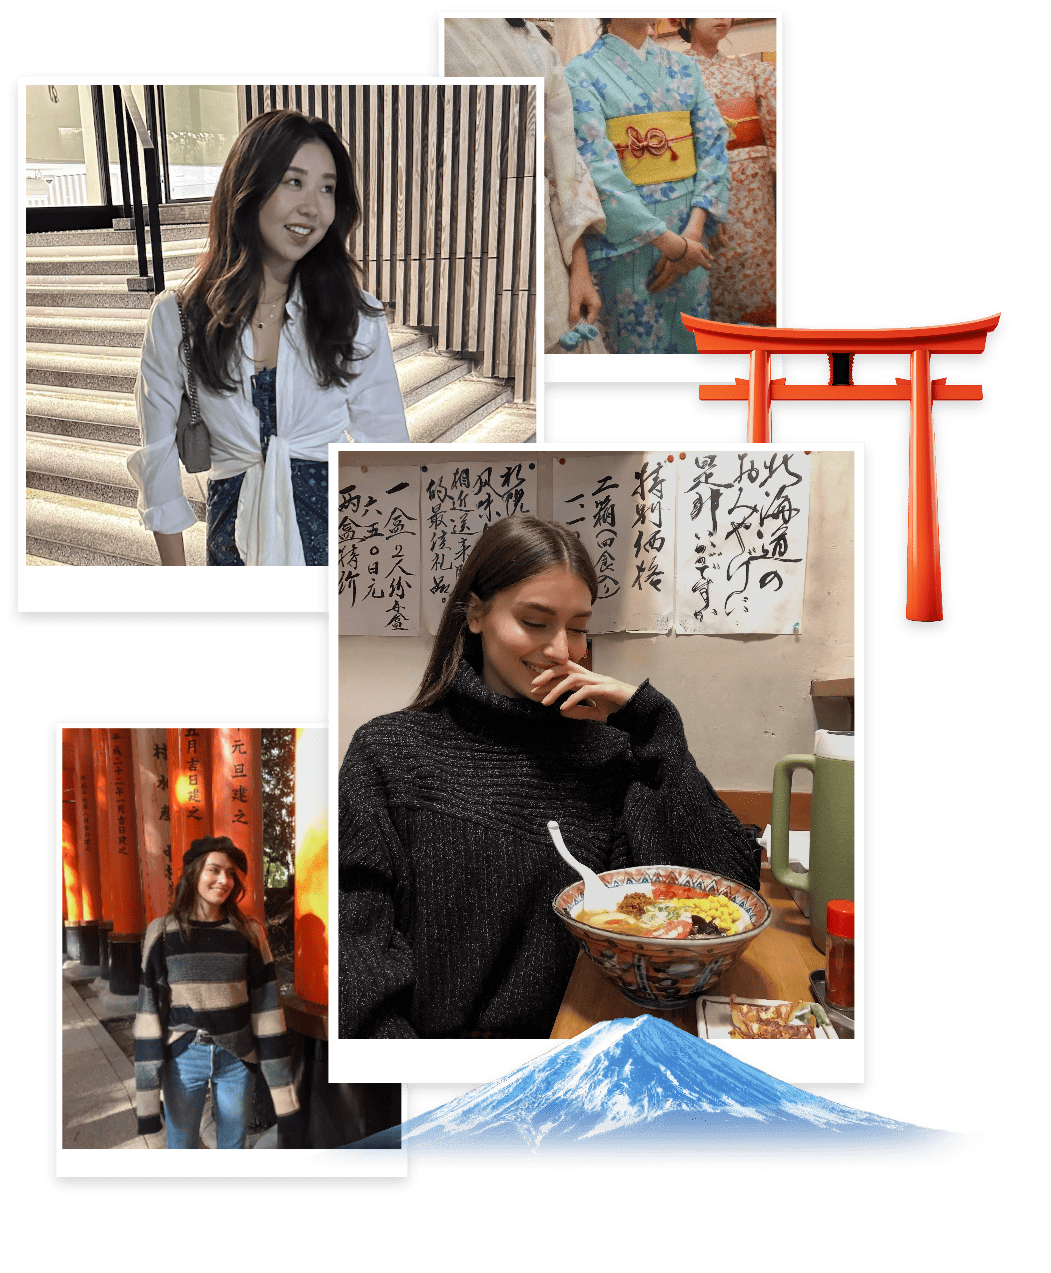 Collage featuring content creators Jess Clements and Alissa with images of women in kimonos, a Shinto temple, and a mountain.